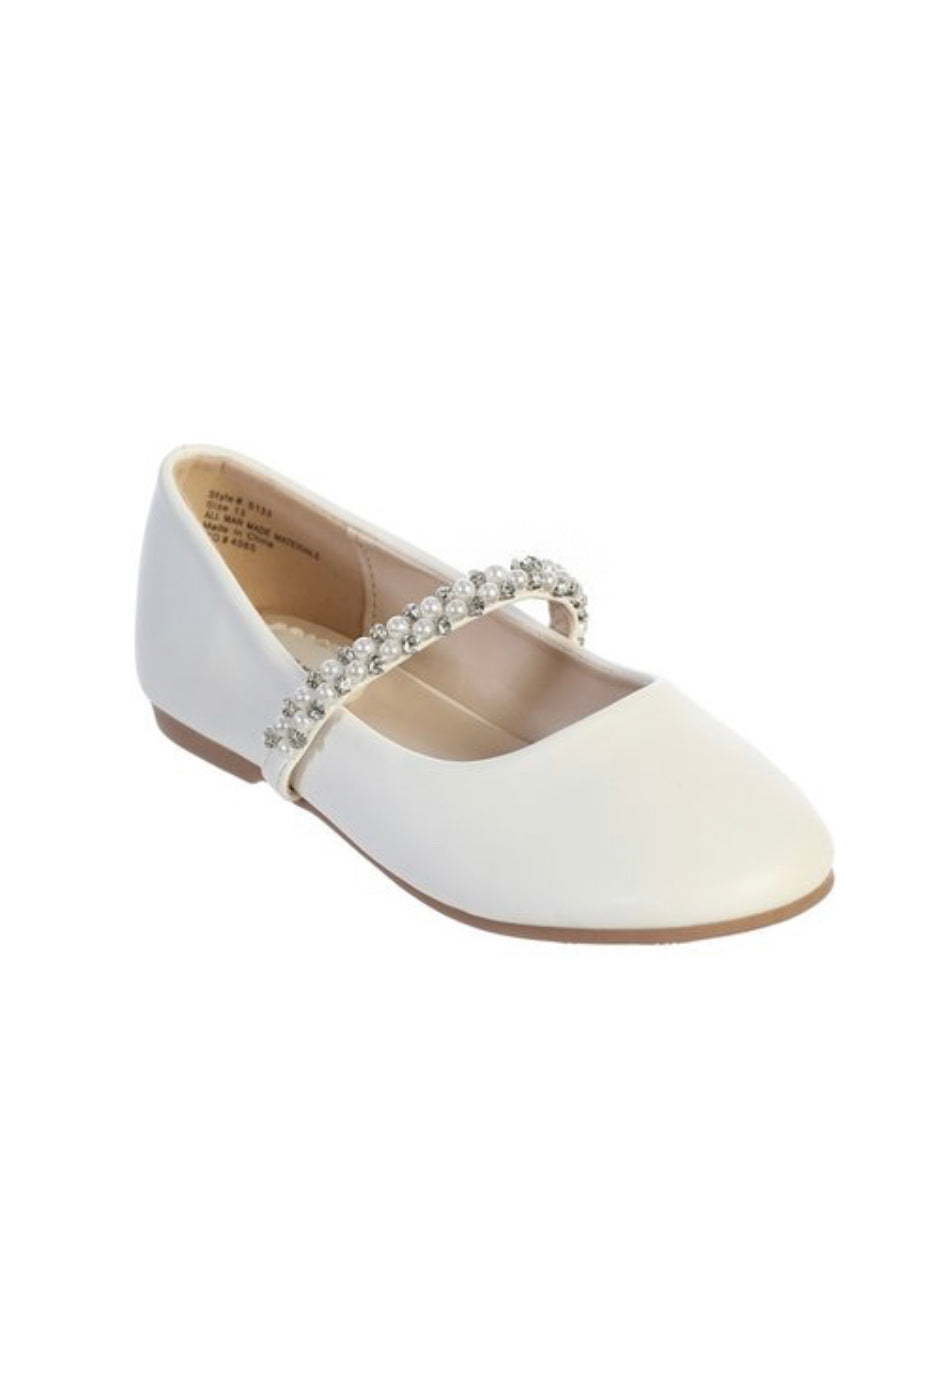 Sale Girls White Formal Flats with Pearls and Rhinestone Special Occasion Kids Shoes